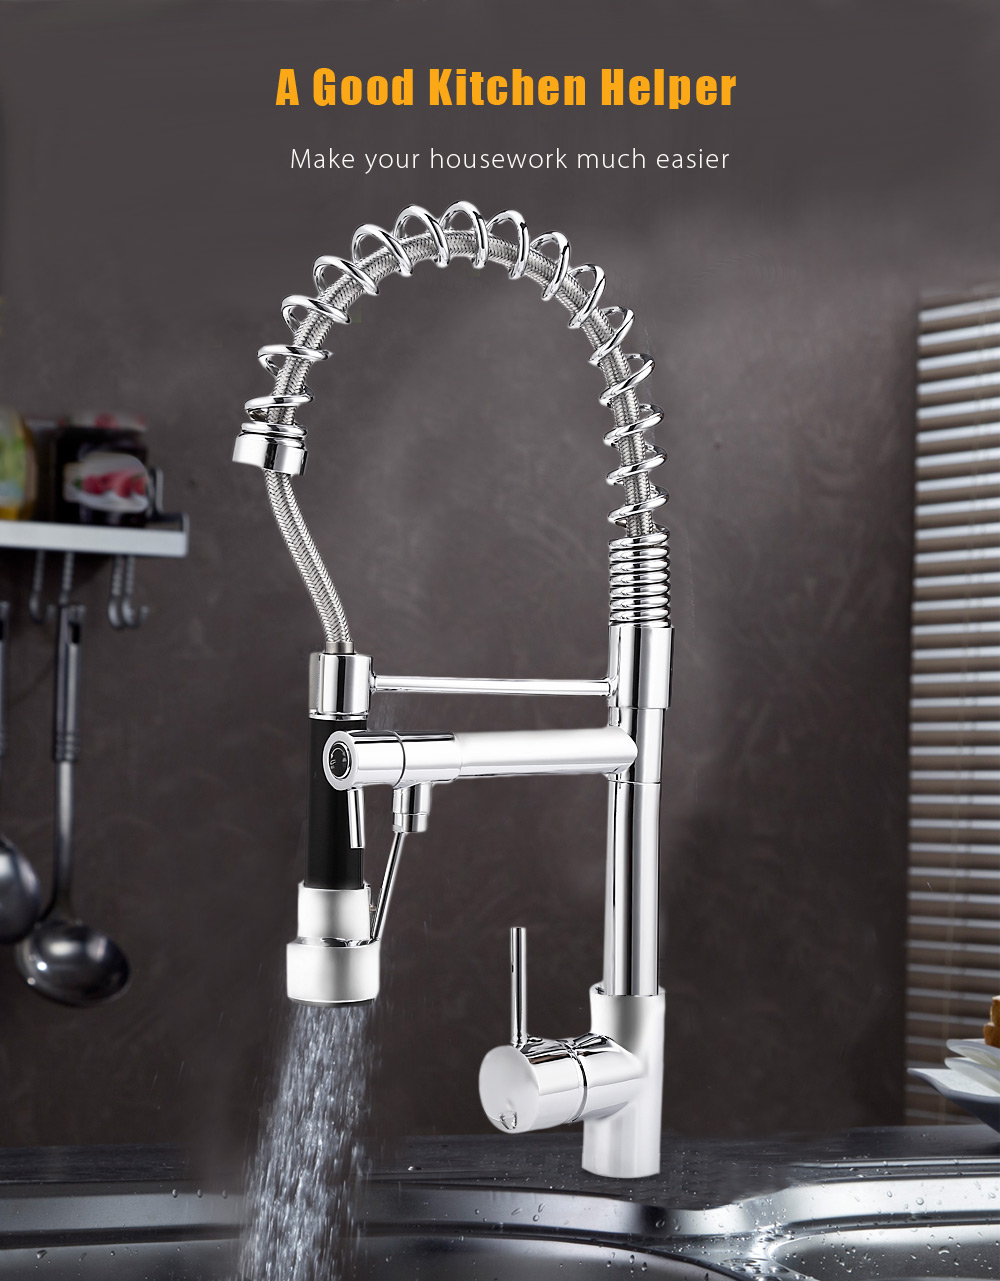 Deck Mounted Pull-down Spray Swivel Kitchen Faucet with Flexible Hose